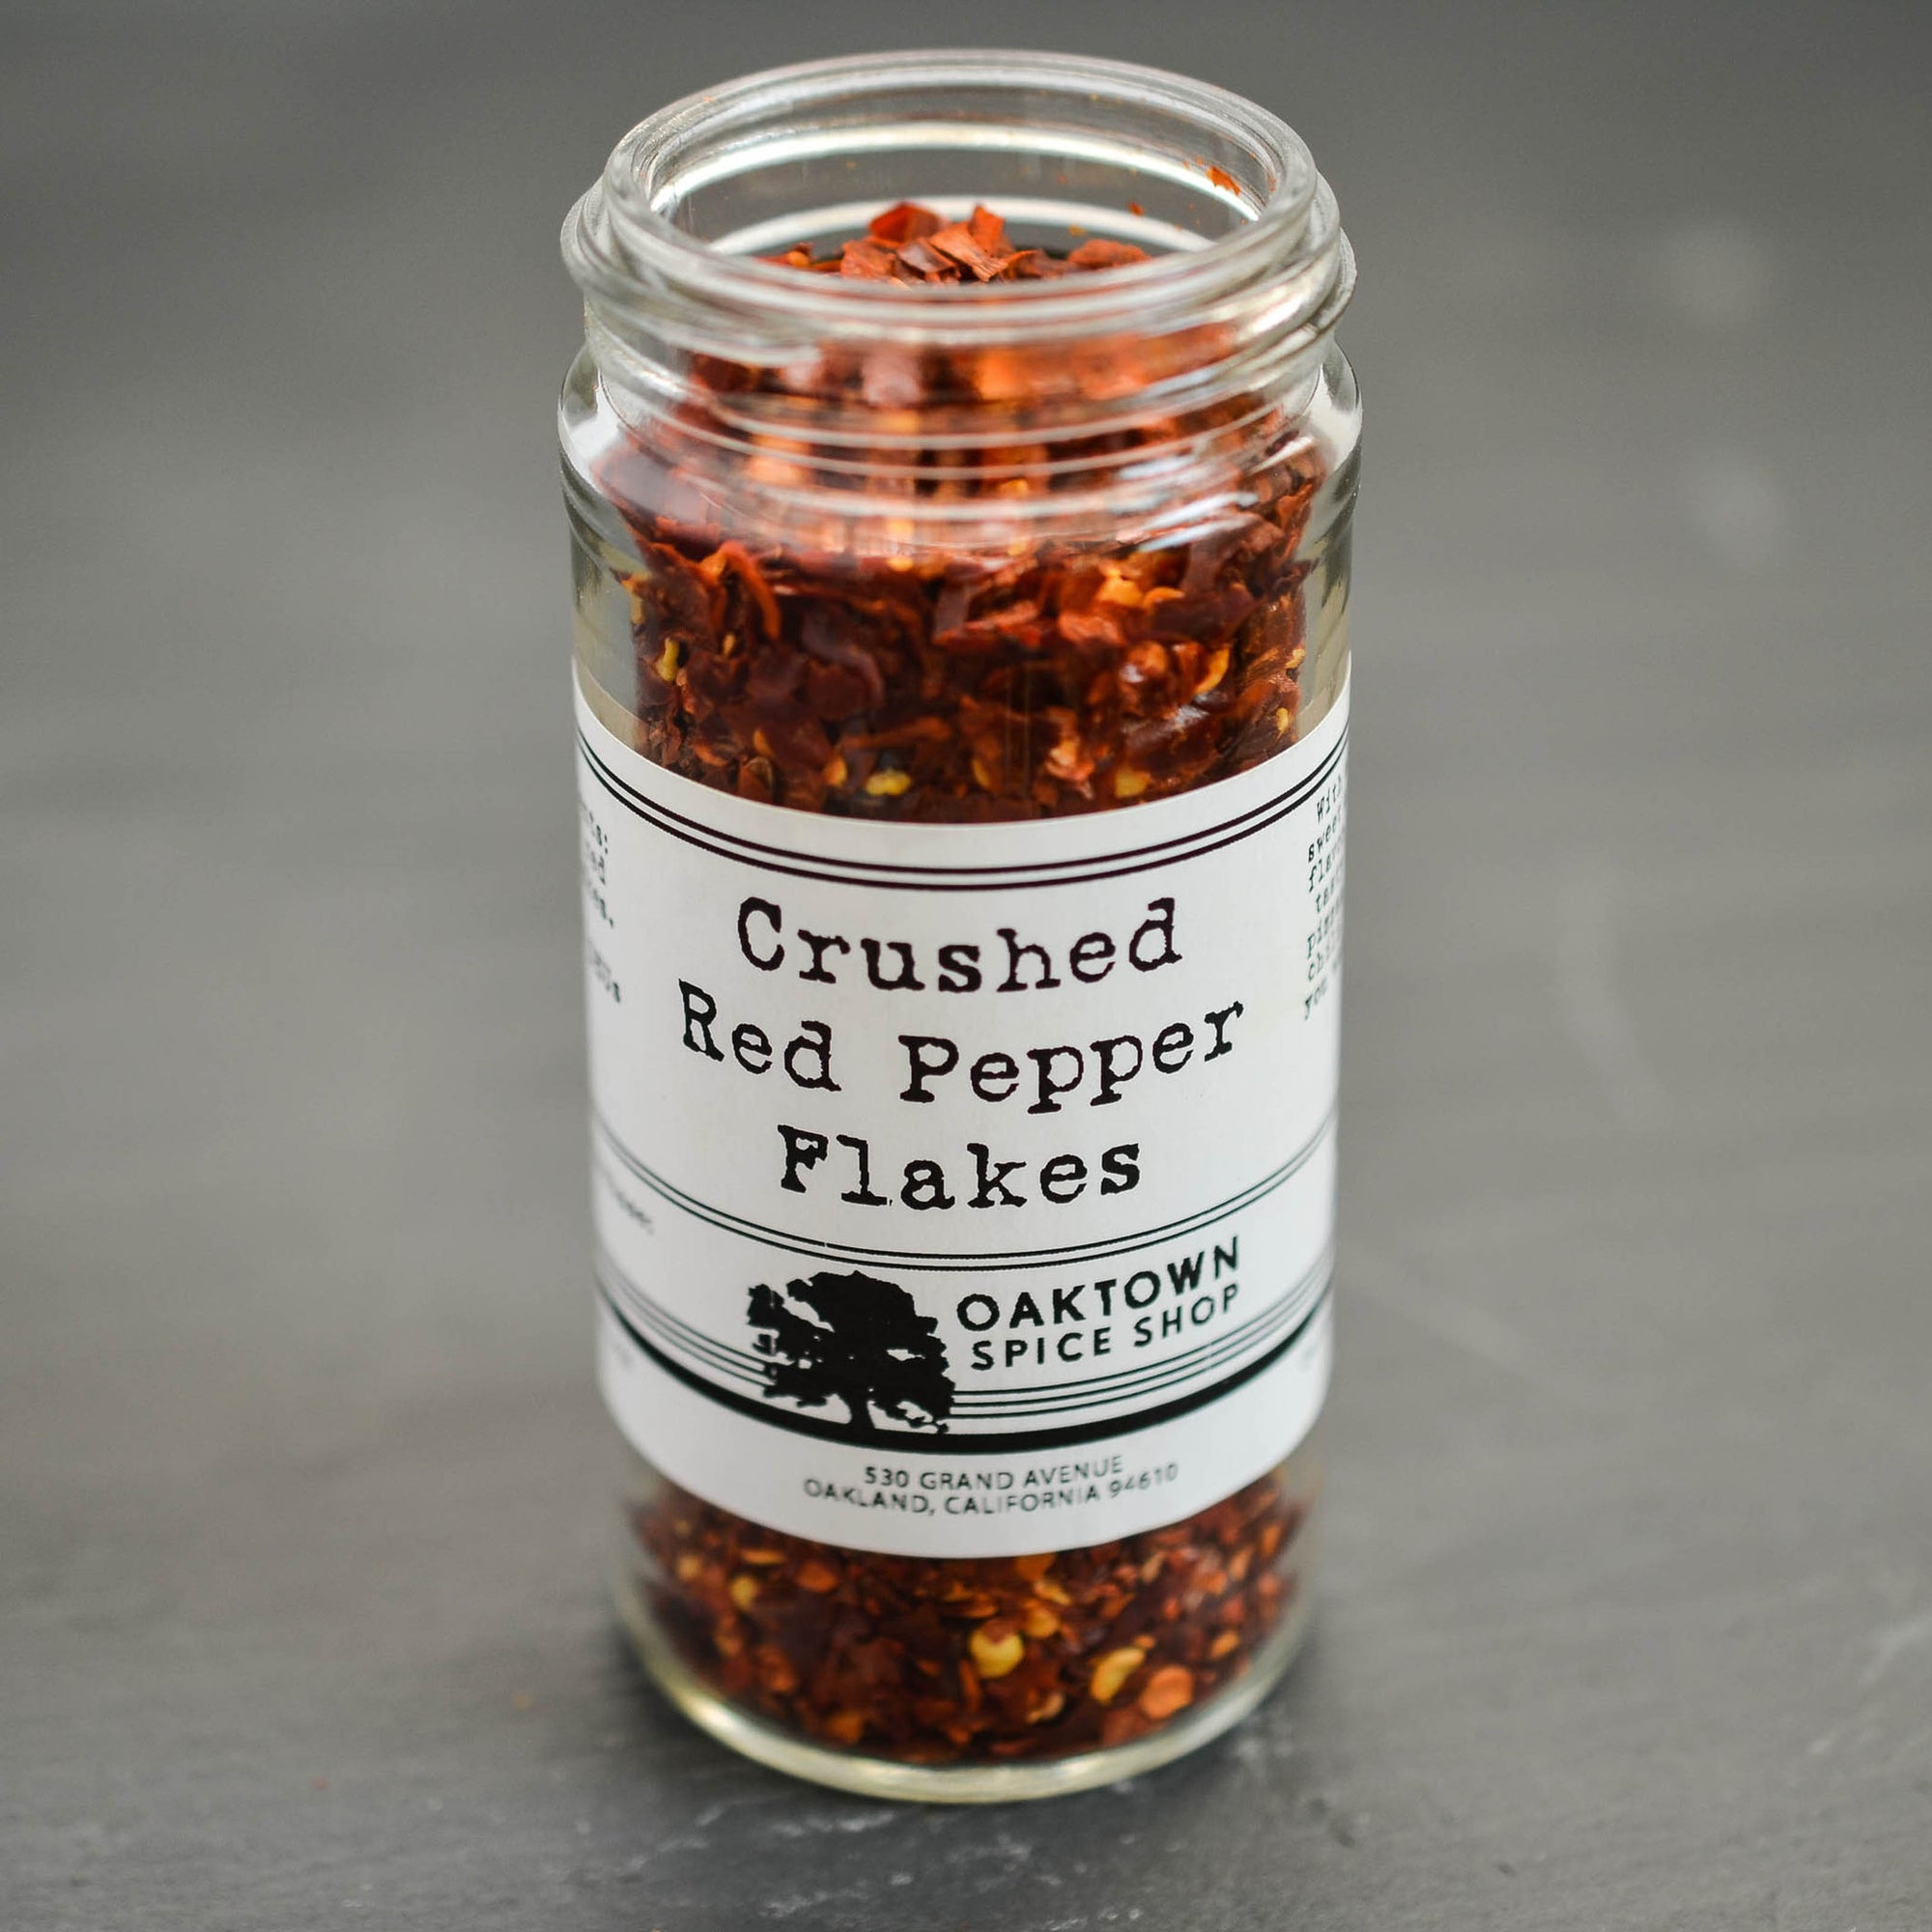 Crushed Red Pepper Flakes With an excellent sweet and hot chile flavor Hand Mixed by Oaktown Spice Shop